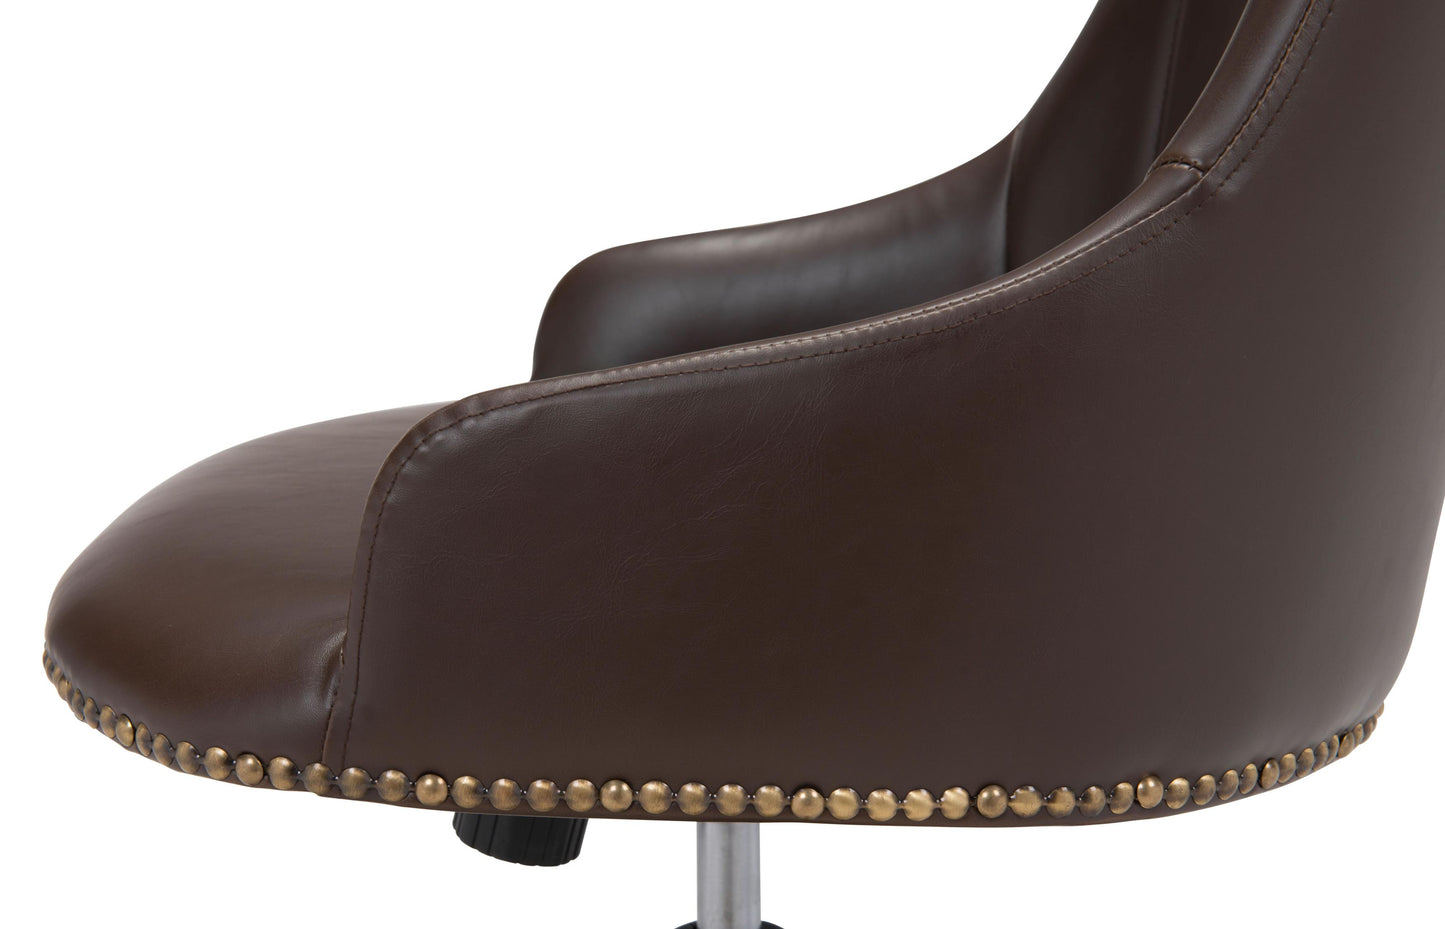 Gables Office Chair Brown